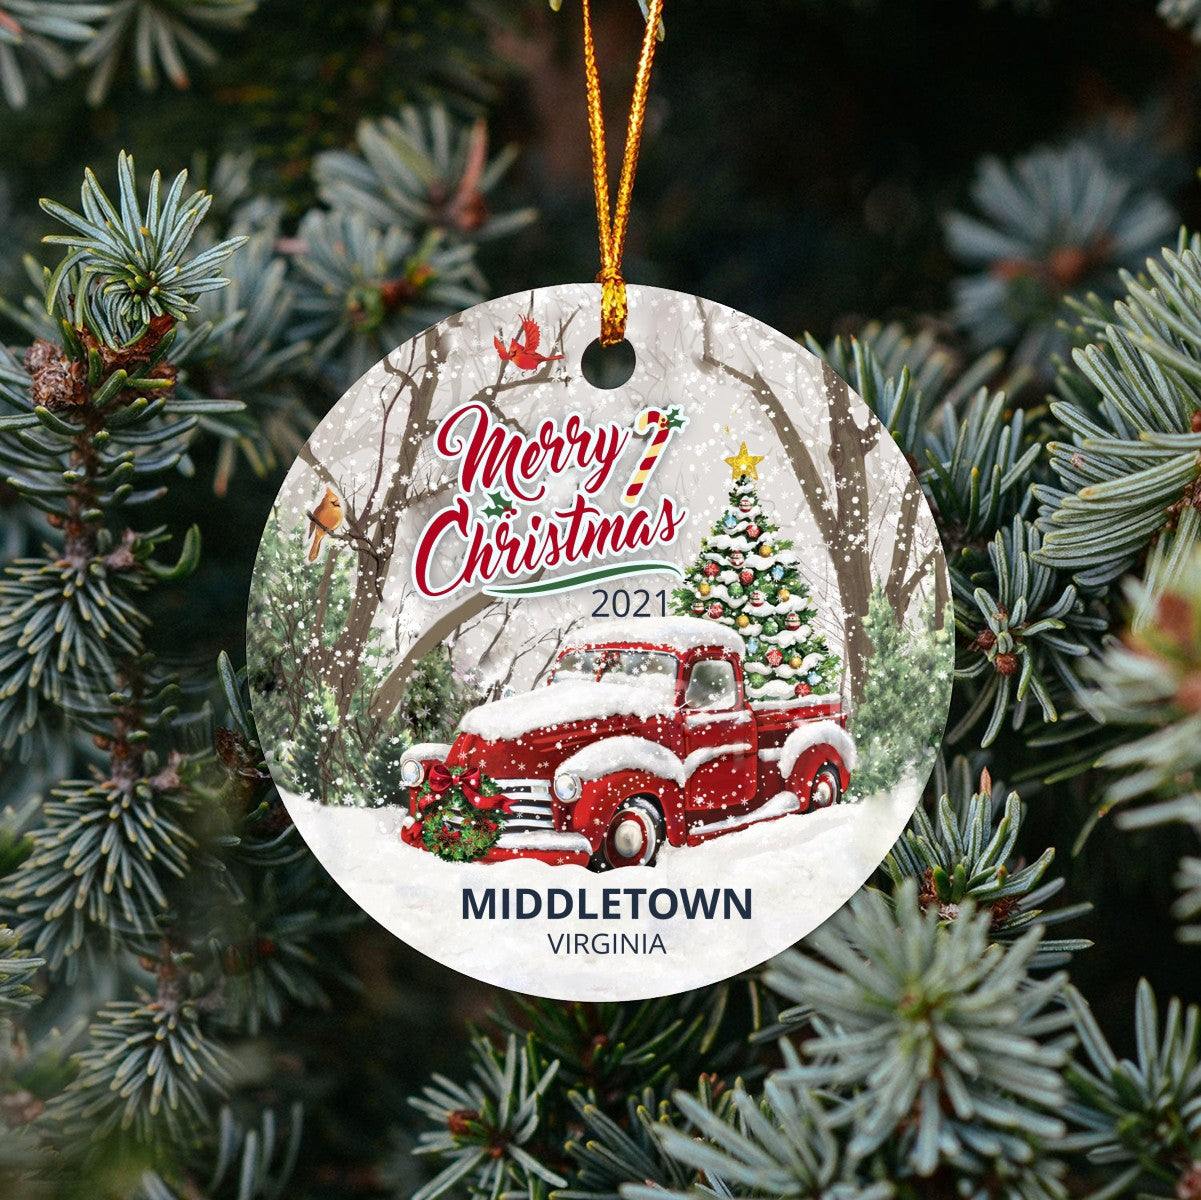 Christmas Tree Ornaments Middletown - Ornament With Name City, State Middletown Virginia VA Ornament - Red Truck Xmas Ornaments 3'' Plastic Gift For Family, Friend And Housewarming